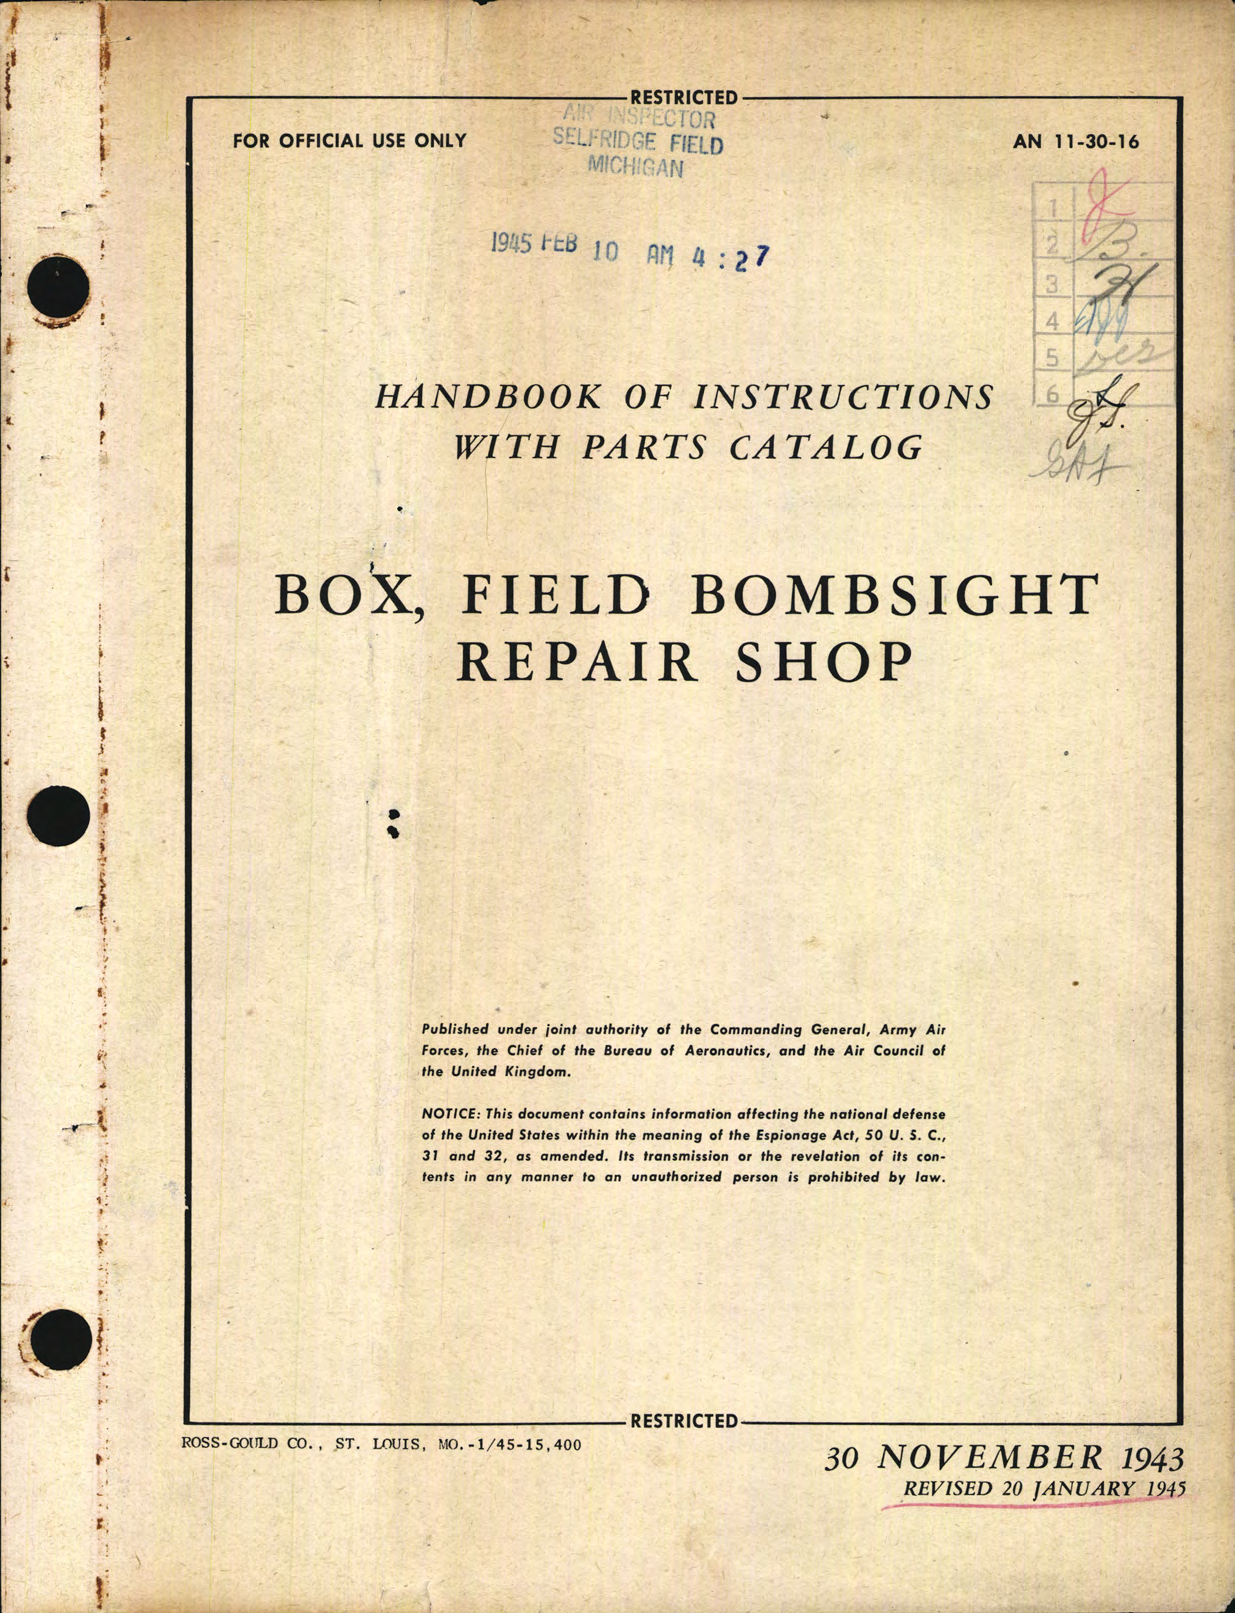 Sample page 1 from AirCorps Library document: Handbook of Instructions with Parts Catalog for Field Bombsight Repair Shop Box